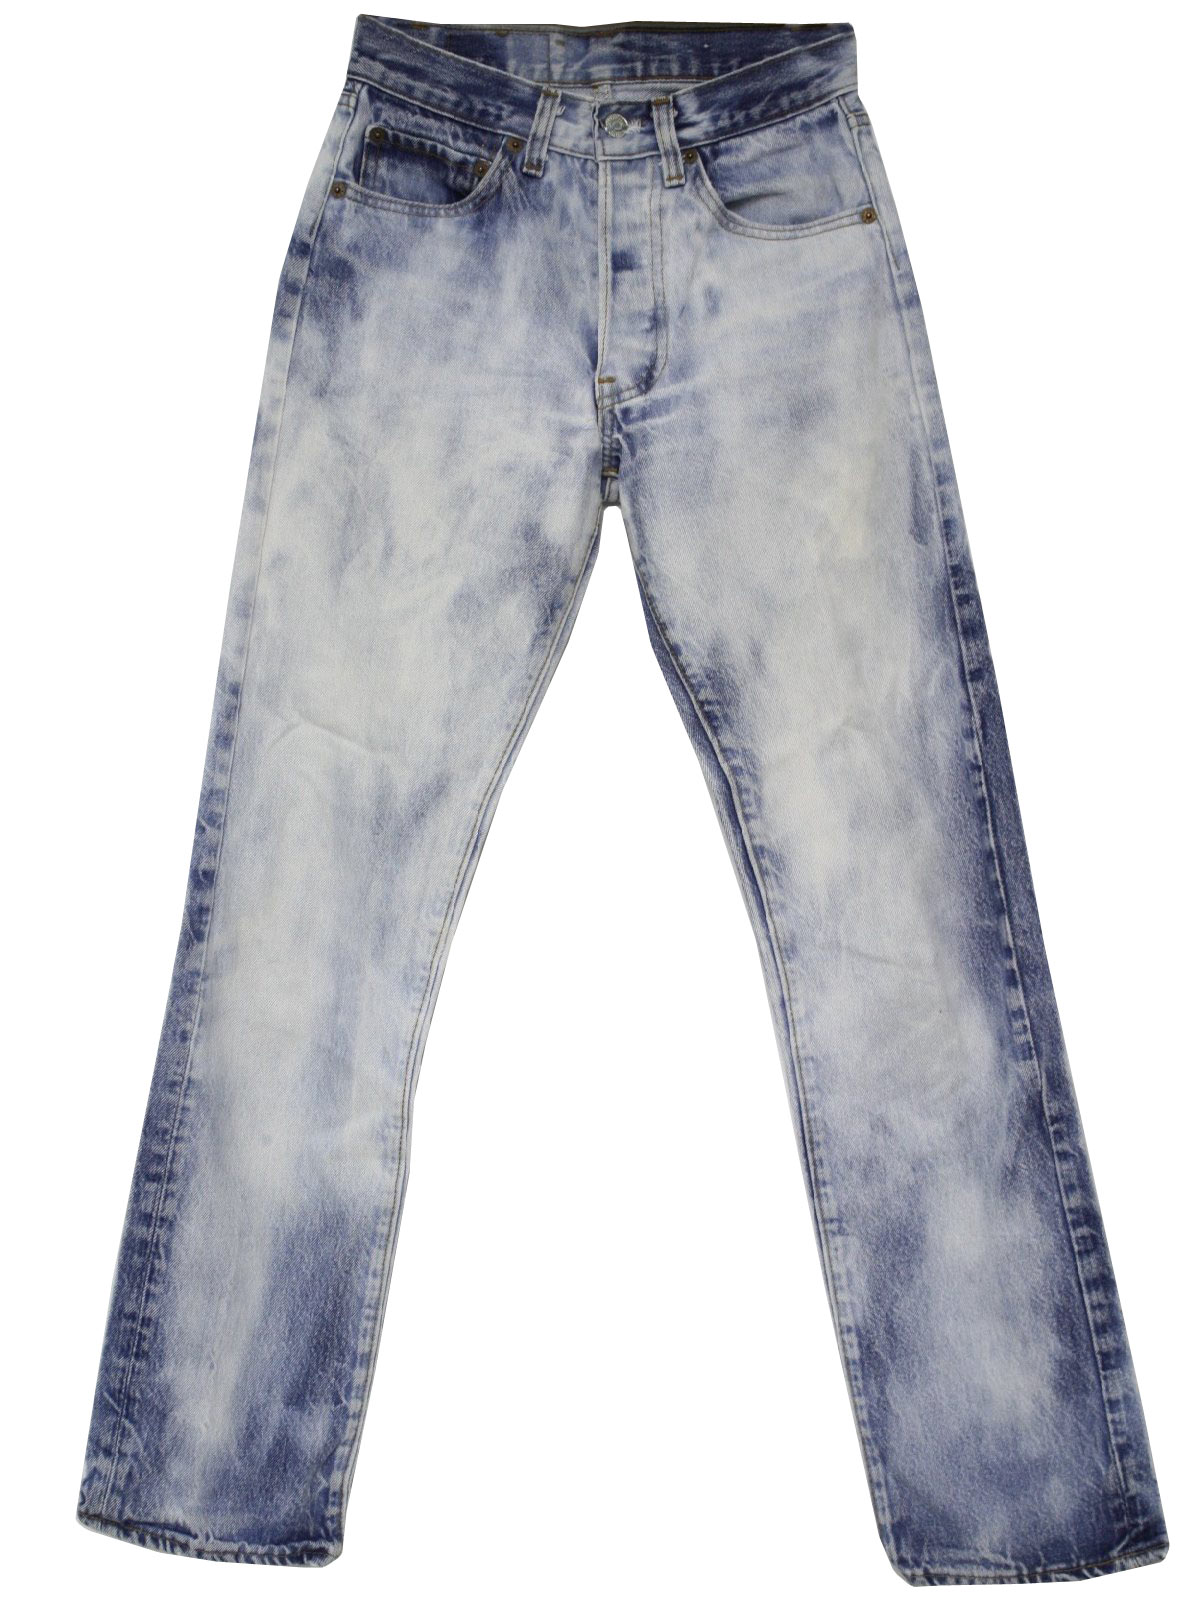 80s bleached jeans